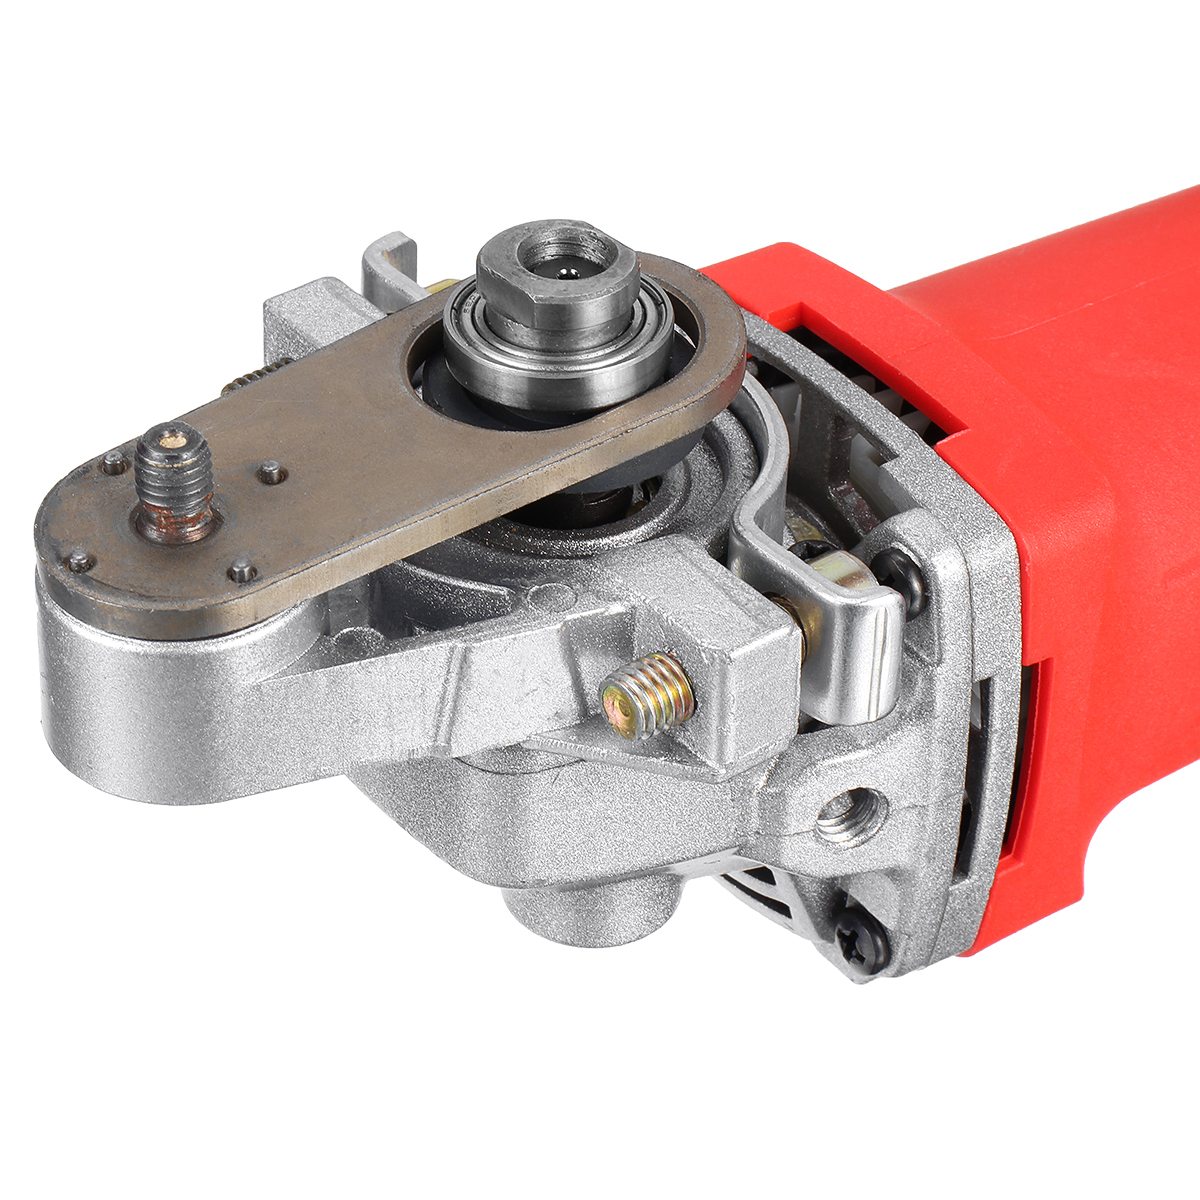 Oscillating-Multi-Saw-Attachment-Adapter-Change-Angle-Grinder-into-Trimming-Machine-Oscillating-Tool-1846644-11